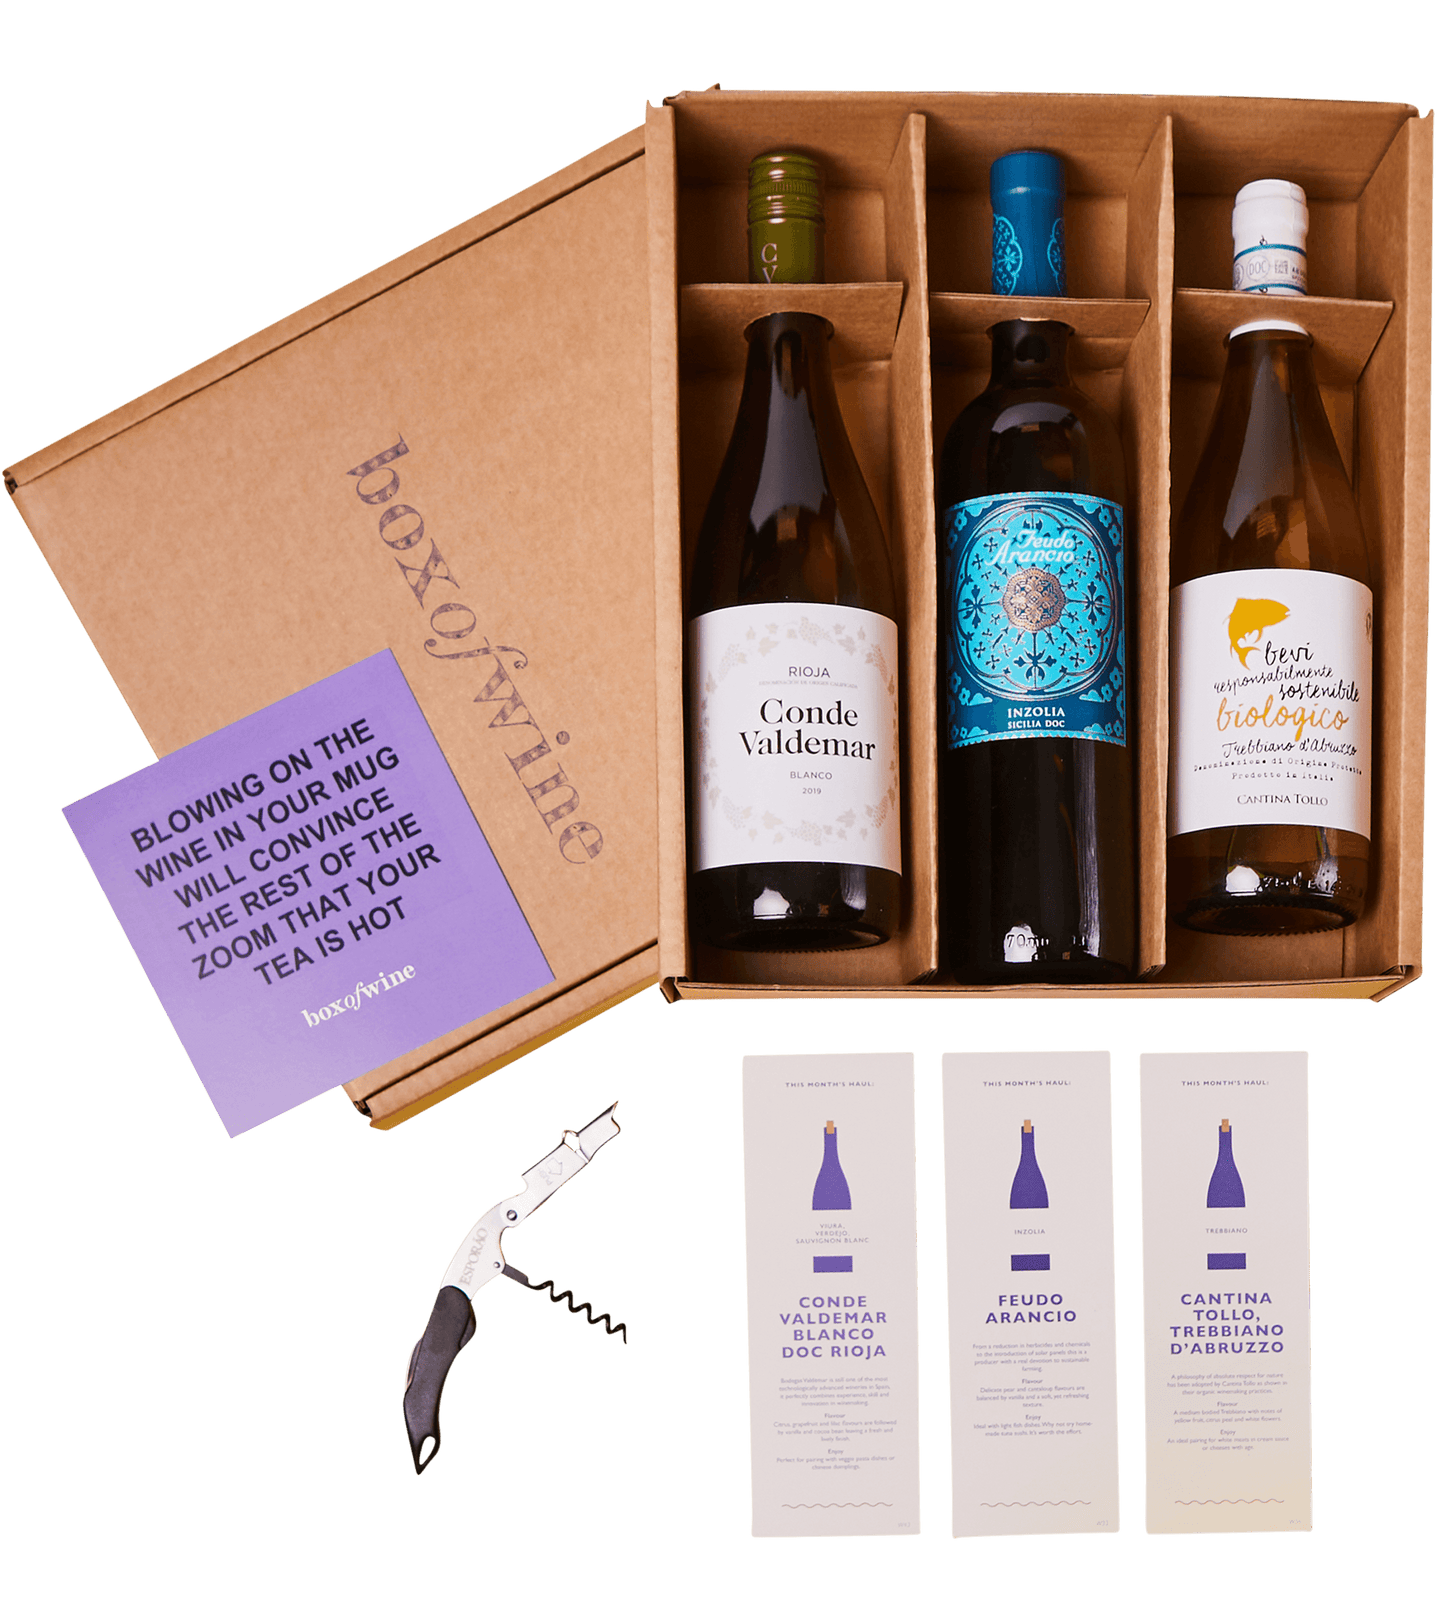 Wine Club Gifts for Last Minute Shoppers